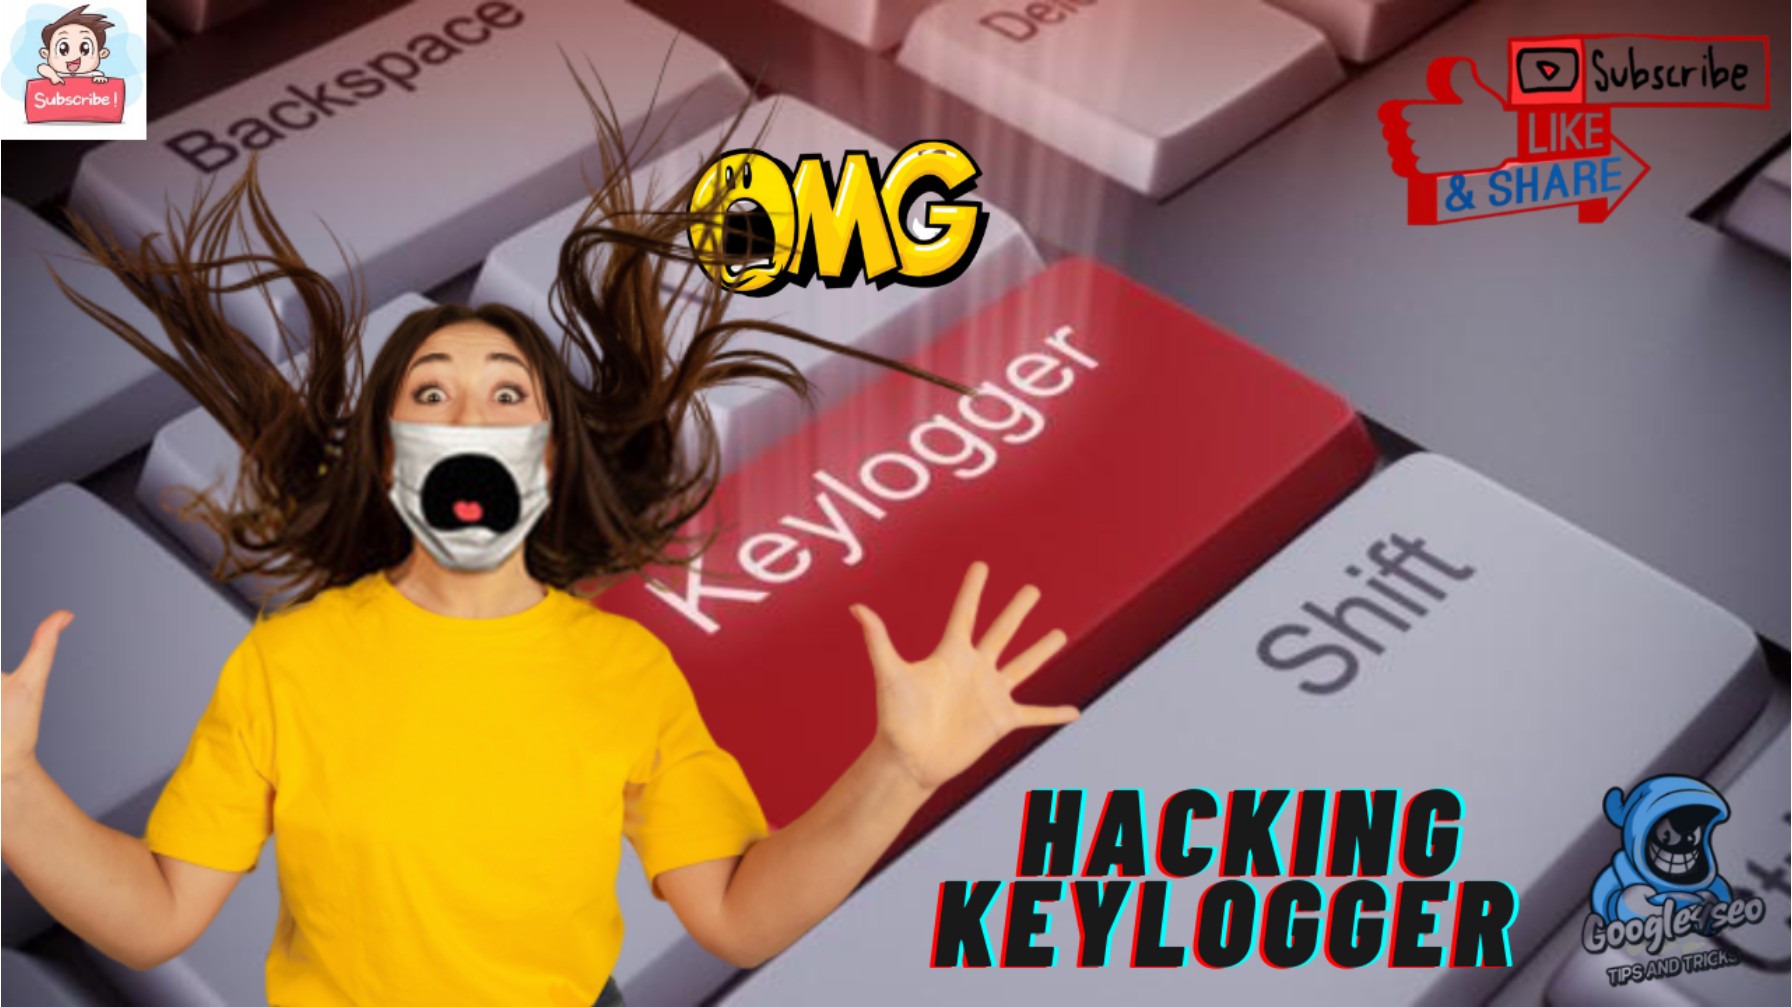 You are currently viewing Keylogger System- Tracking Your Keyboard Activity l Password Leak Details ExplainedðŸ”¥ðŸ”¥